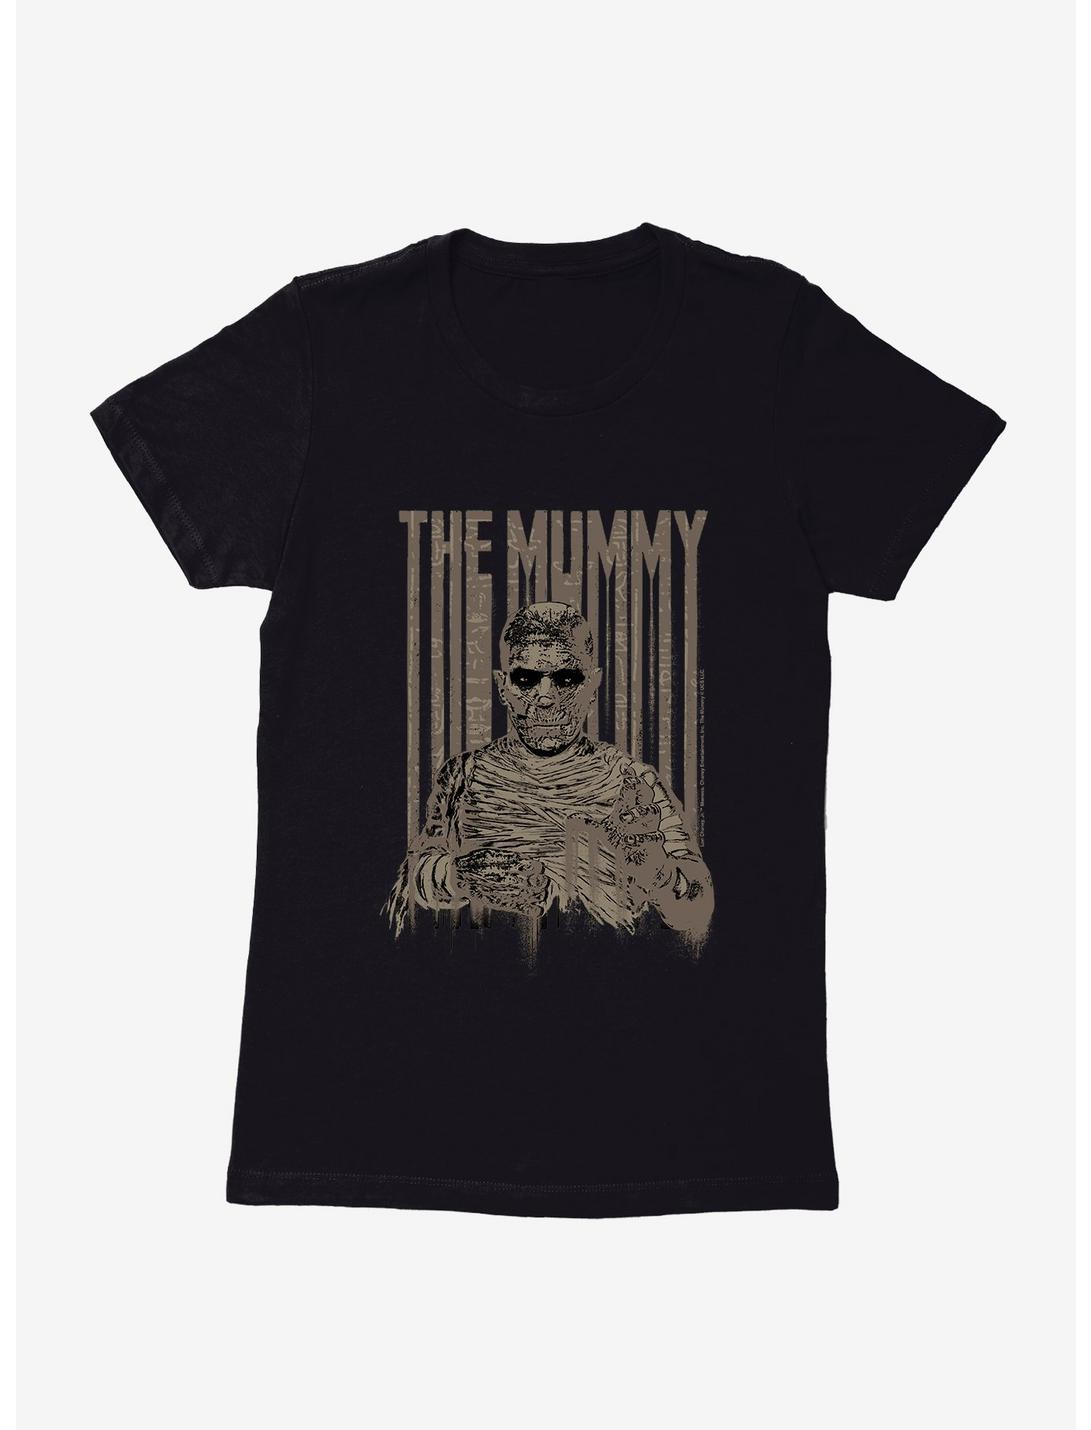 Universal Monsters The Mummy Wraps Second Color Womens T-Shirt, BLACK, hi-res